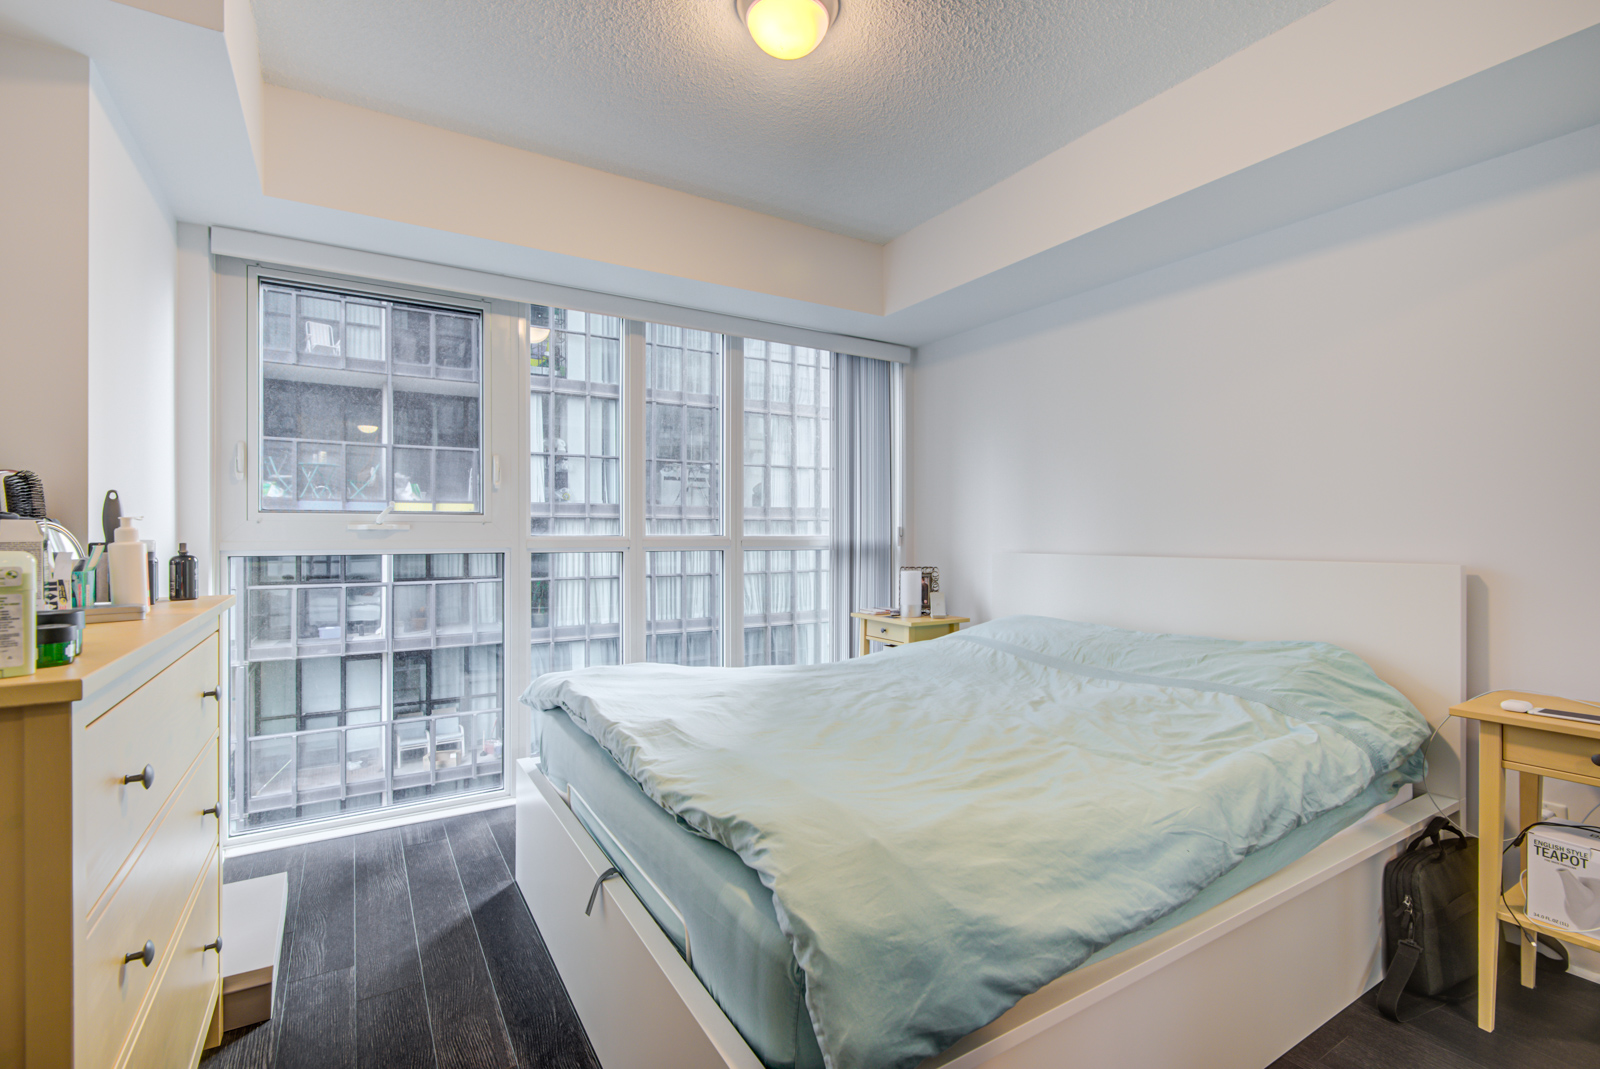 28 Ted Rogers Unit 1702 master bedroom with large bed, floor-to-ceiling windows and gray walls.